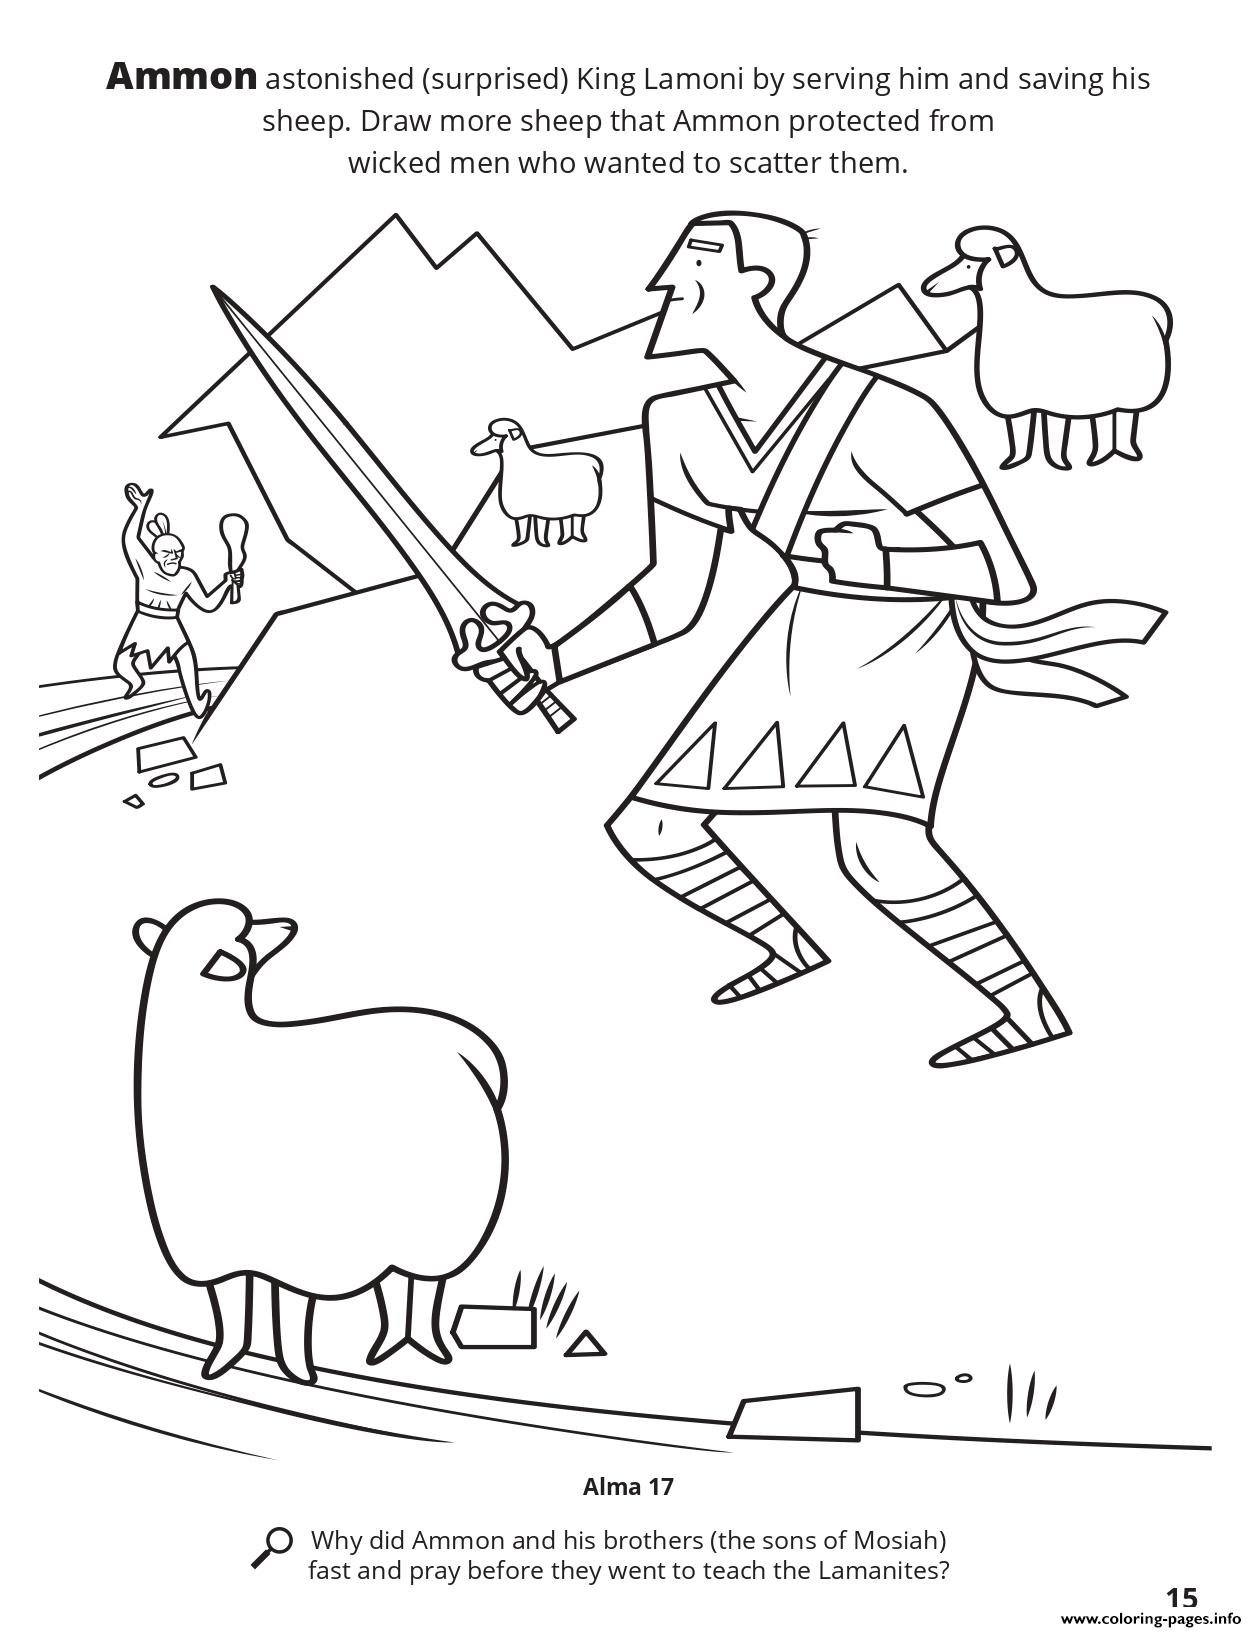 Ammon Astonished King Lamoni By Serving Him And Saving His Sheep coloring